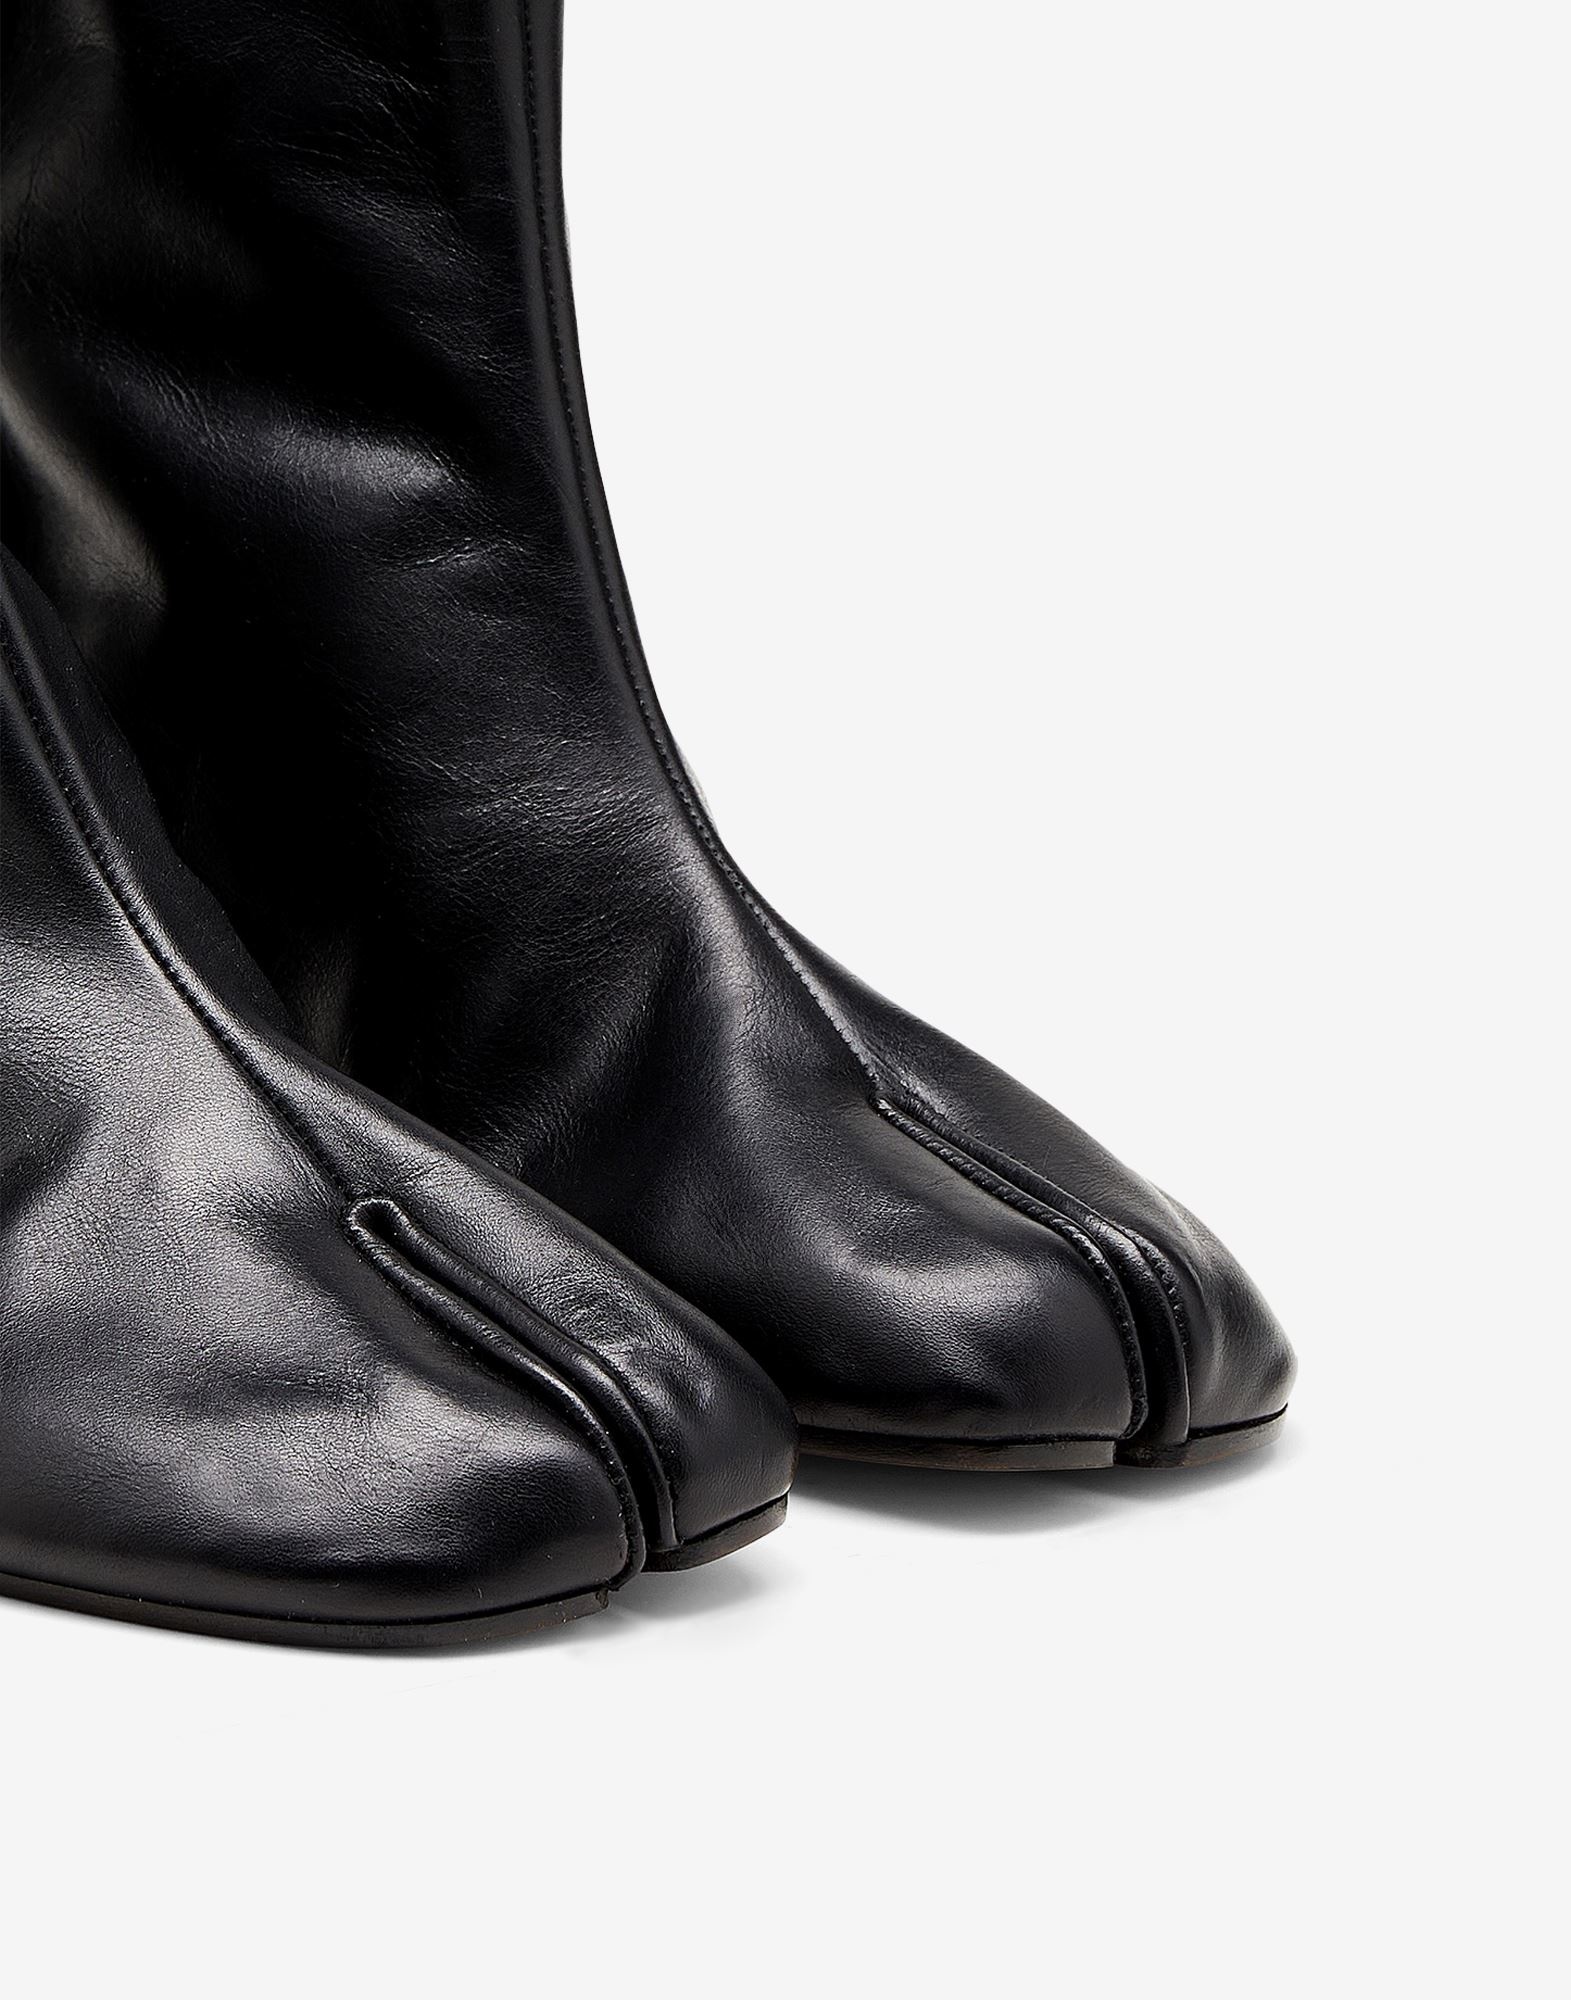 Tabi ankle boots - 5